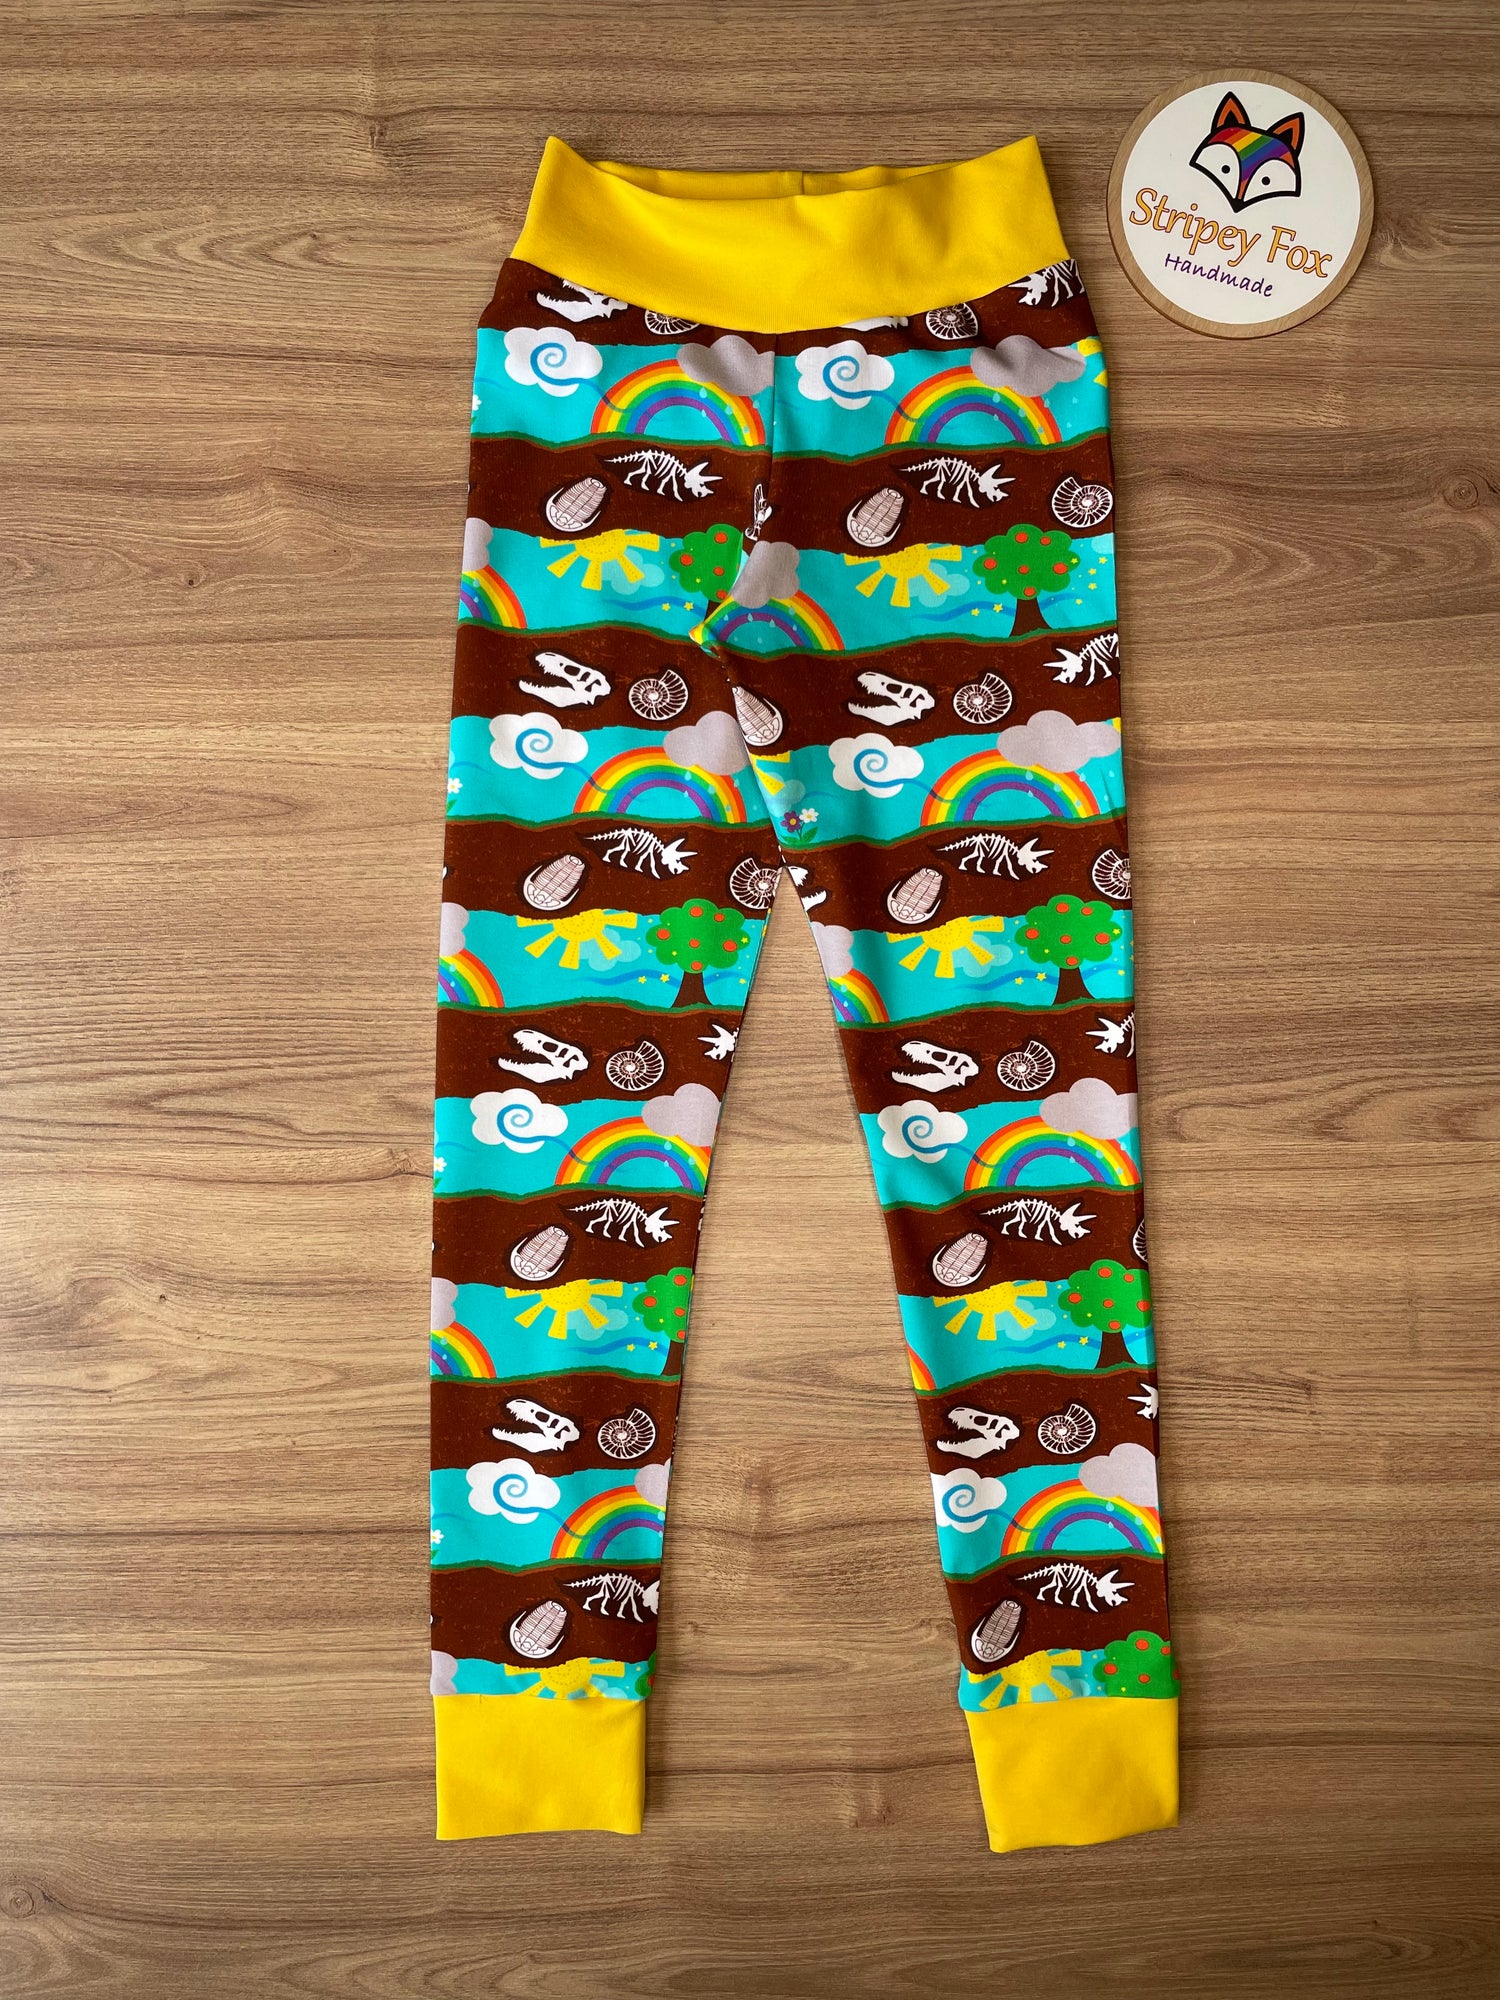 Handmade Baby and Childrens Relaxed Fit Leggings - Unisex Prints